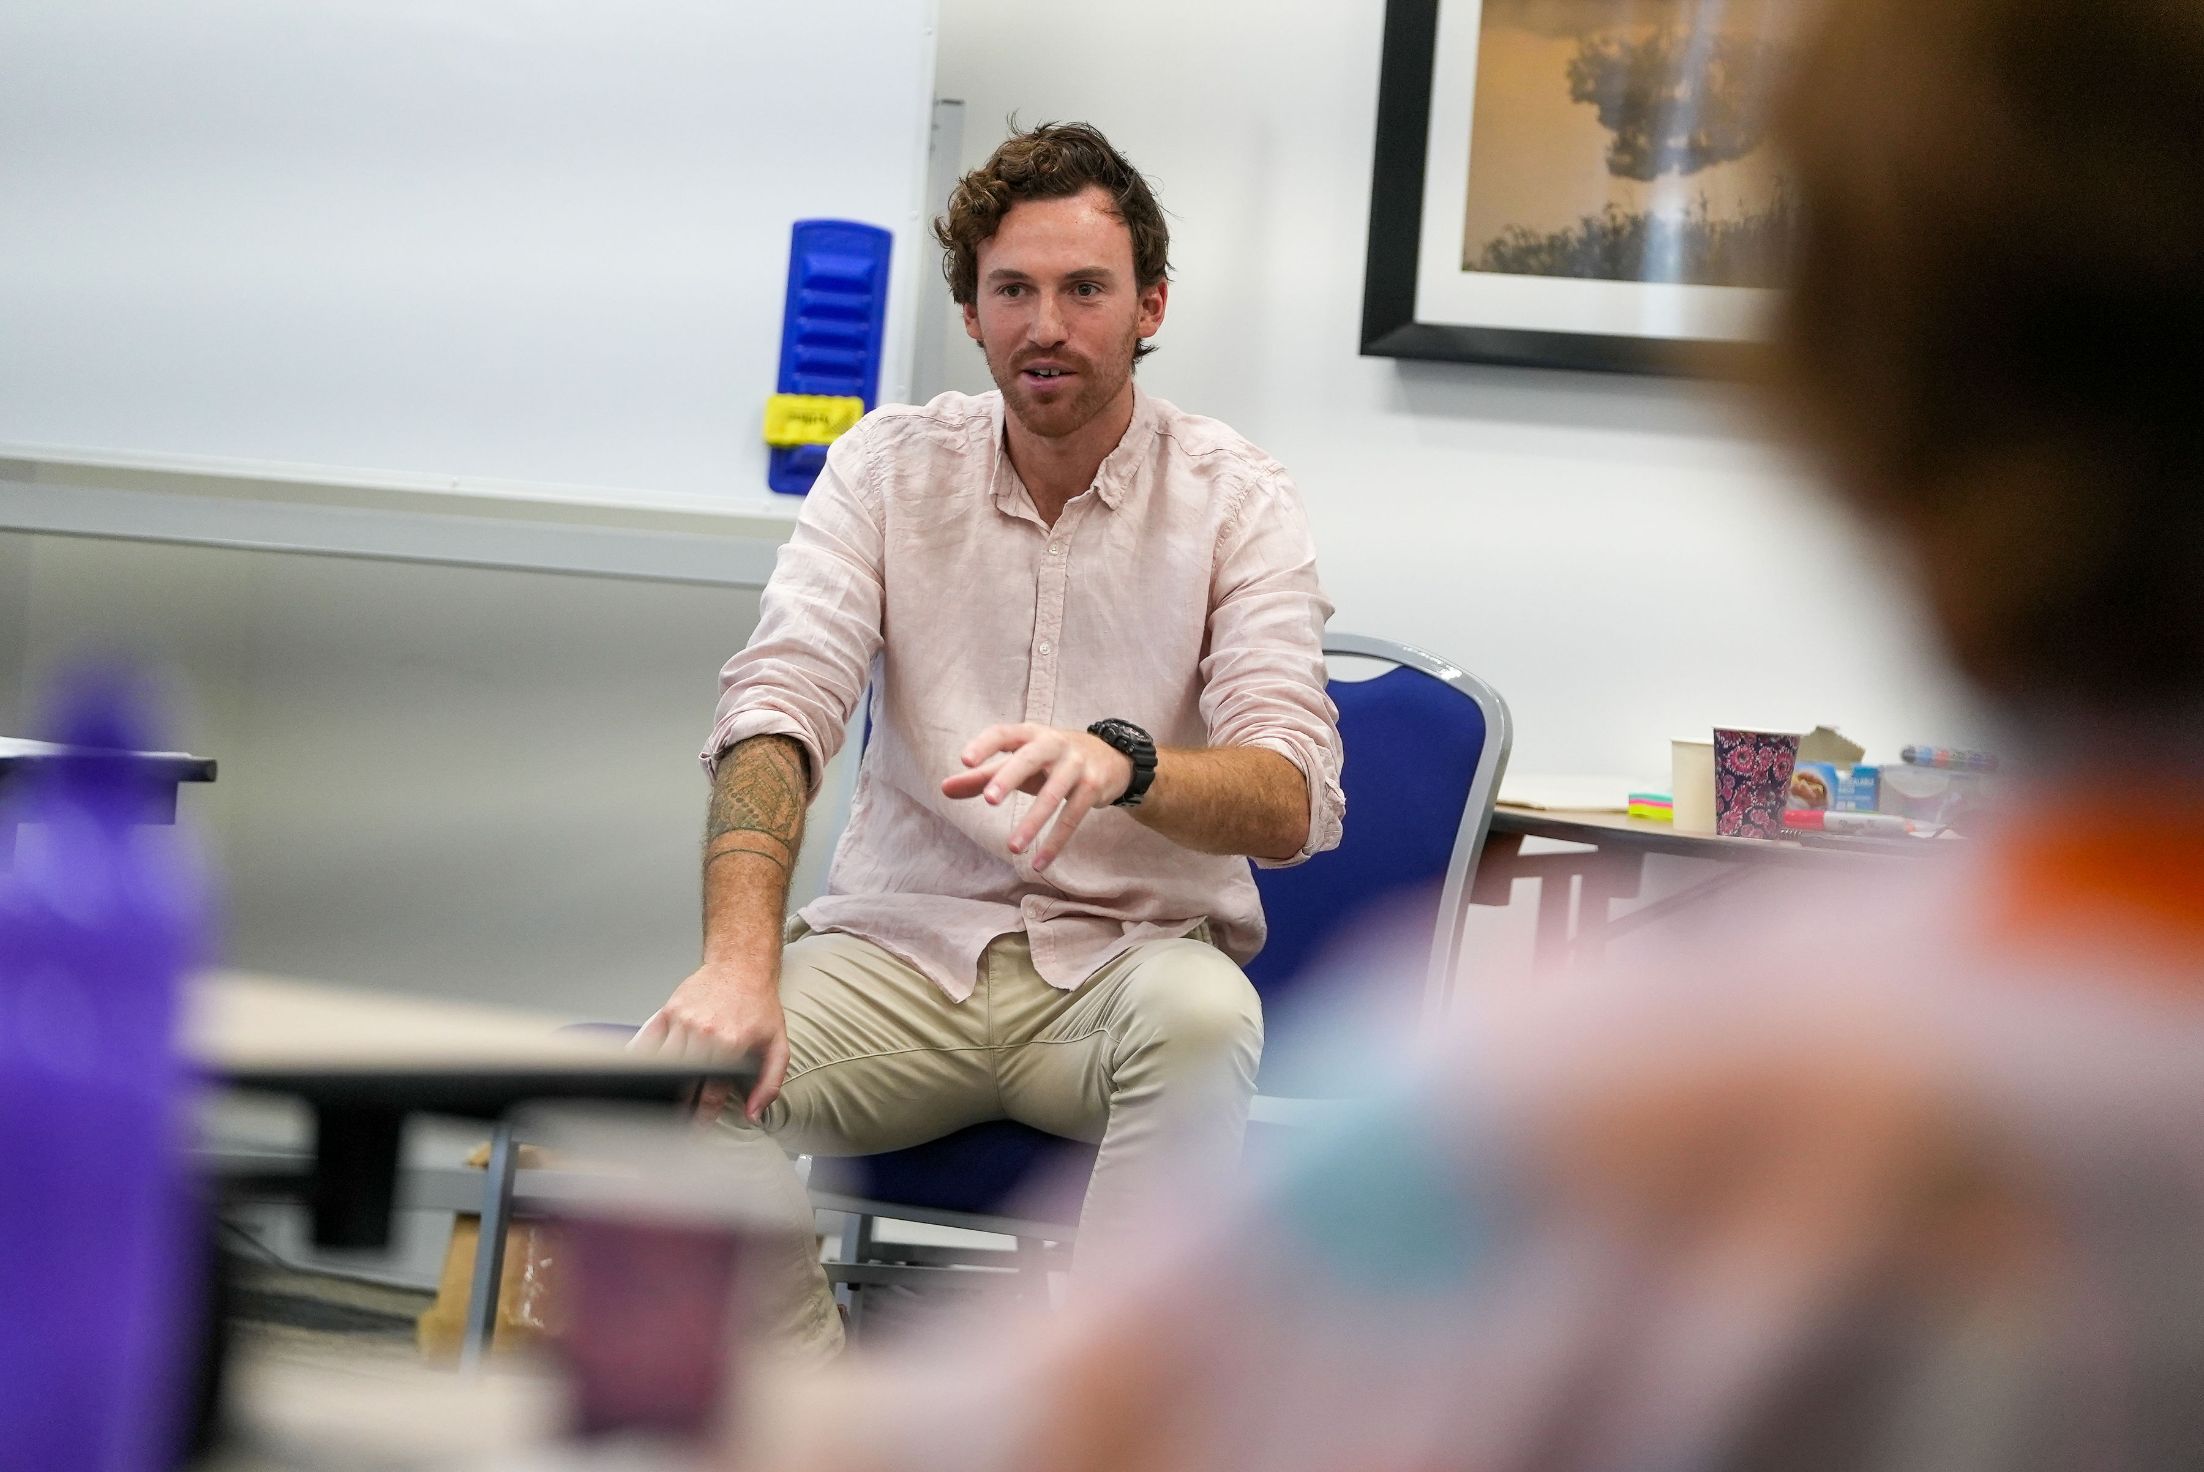 A man with dark hair and a short beard sits in an office environment. He is facing people and is speaking and gesturing. He wears a very pale pink linen shirt and khaki pants and a chunky black watch.